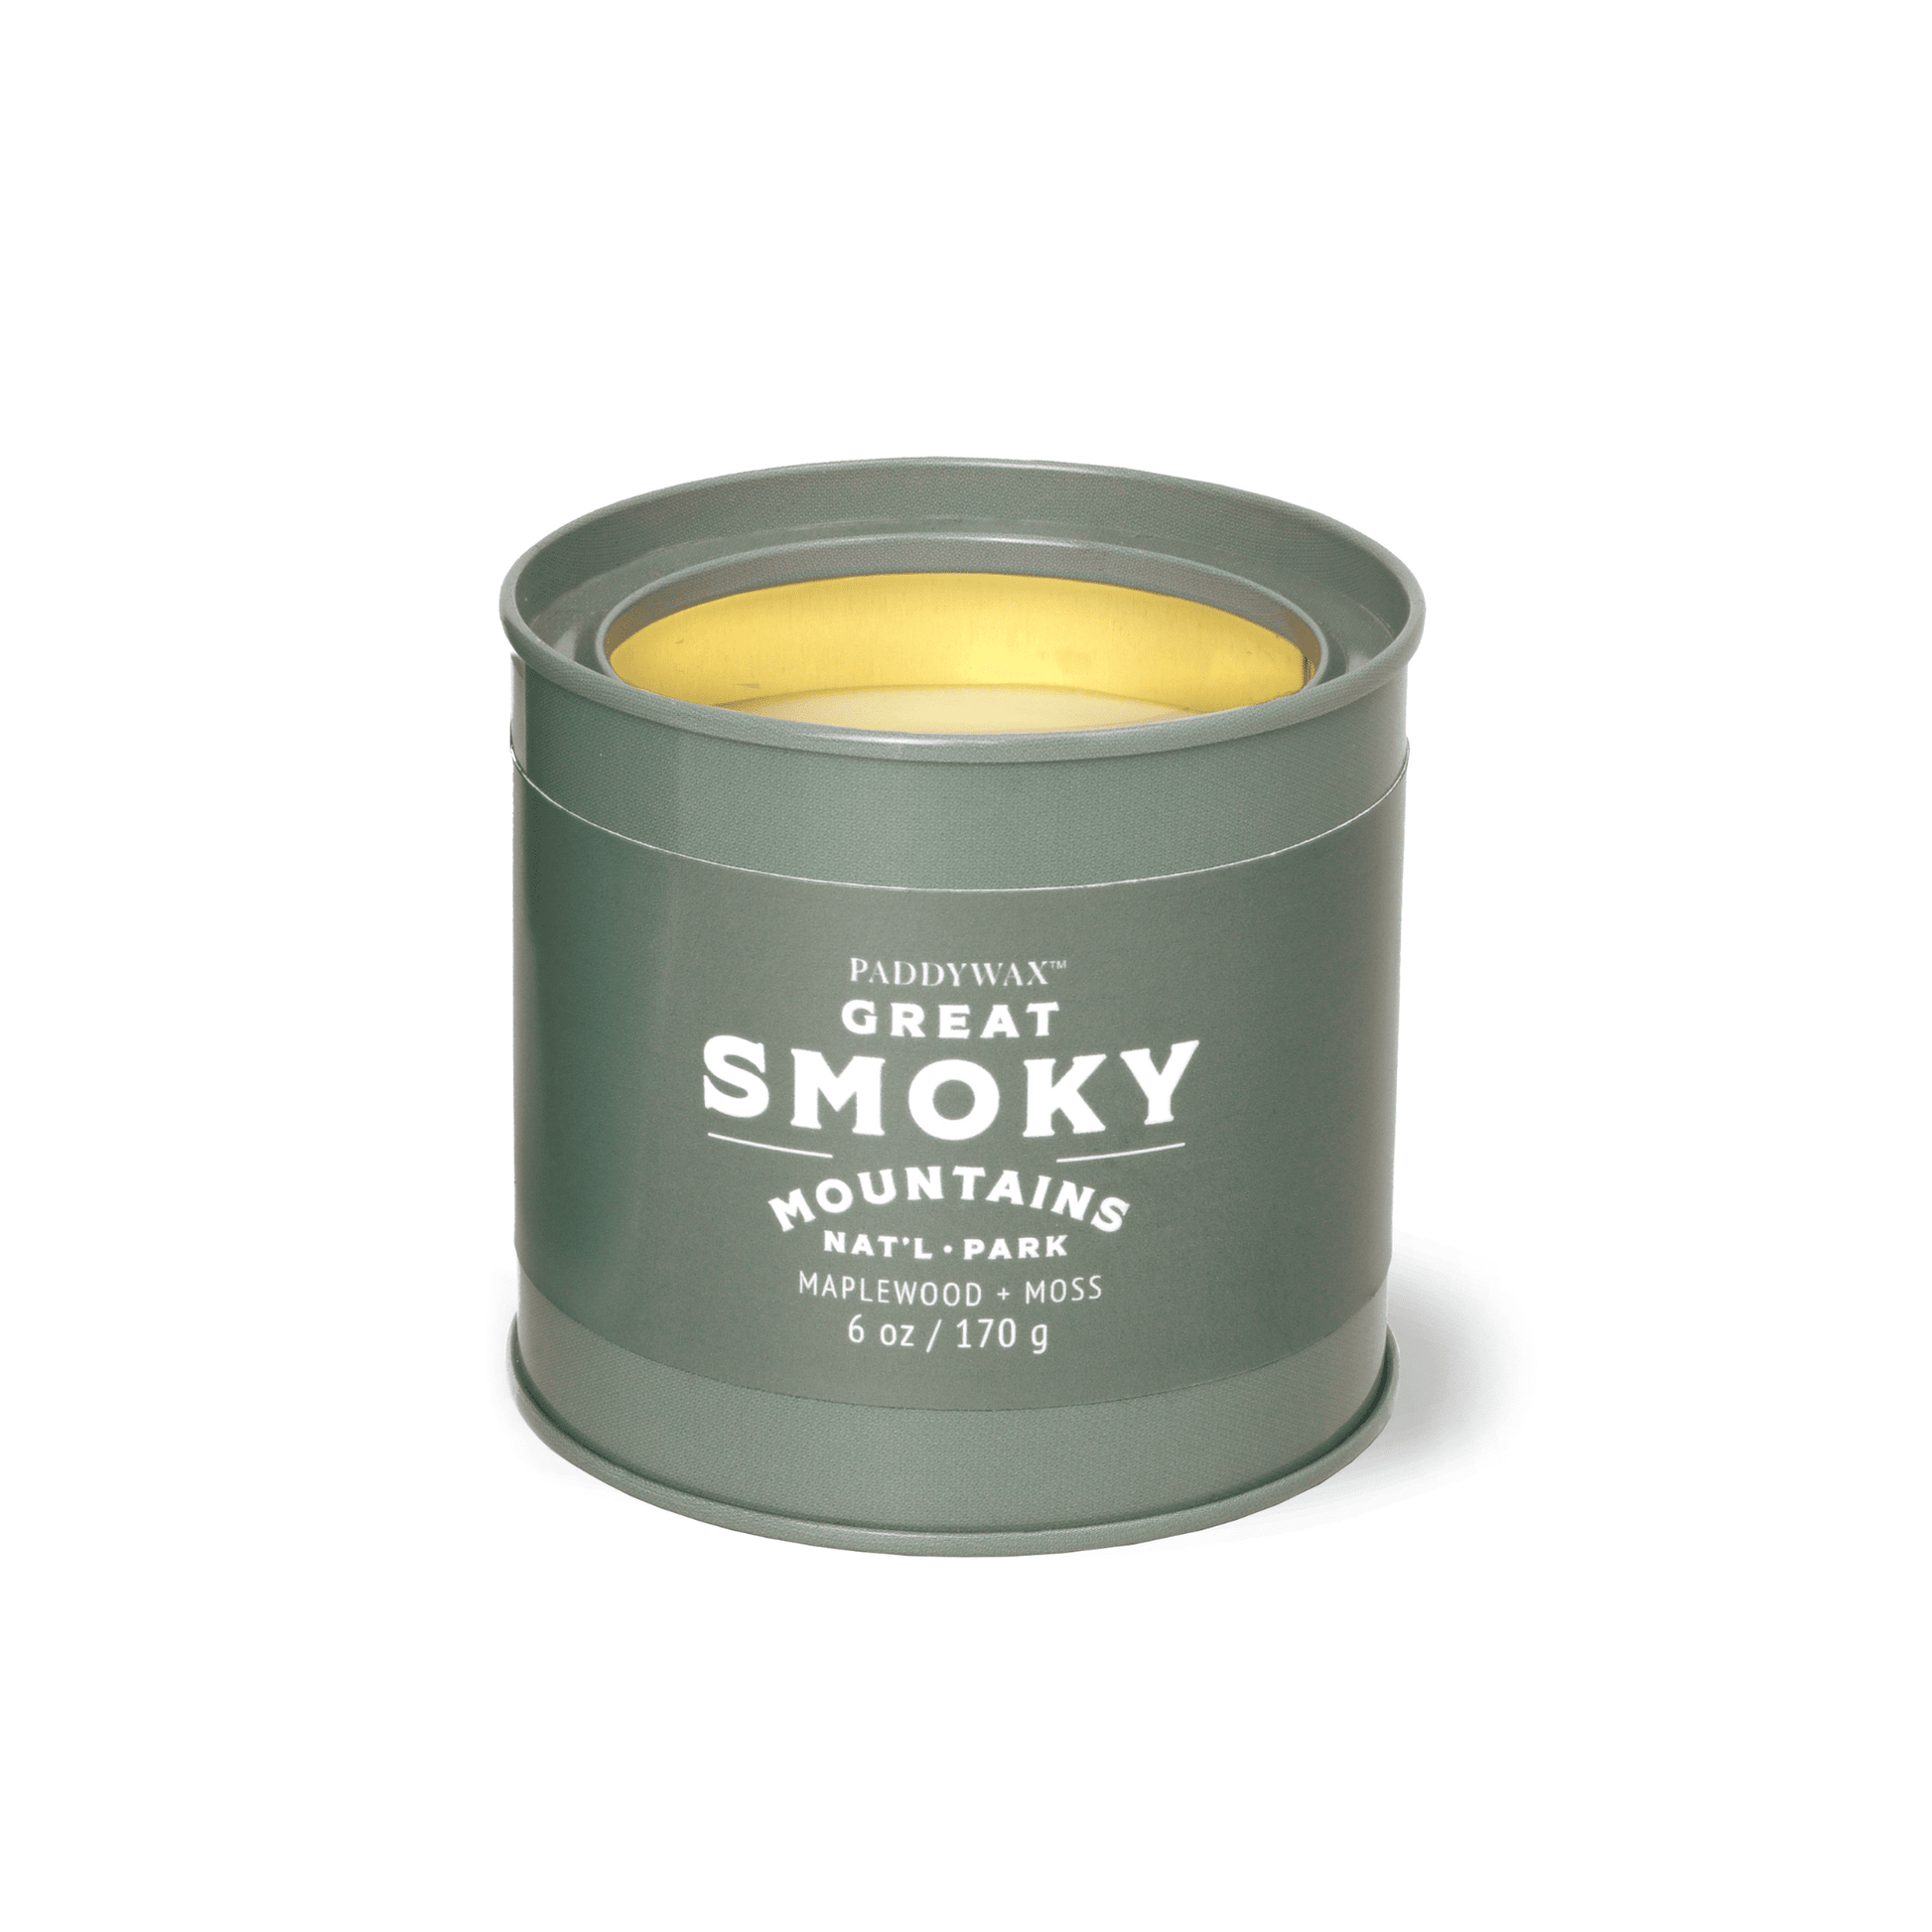 Parks 6oz Candle - Maplewood + Moss candle on a white background.